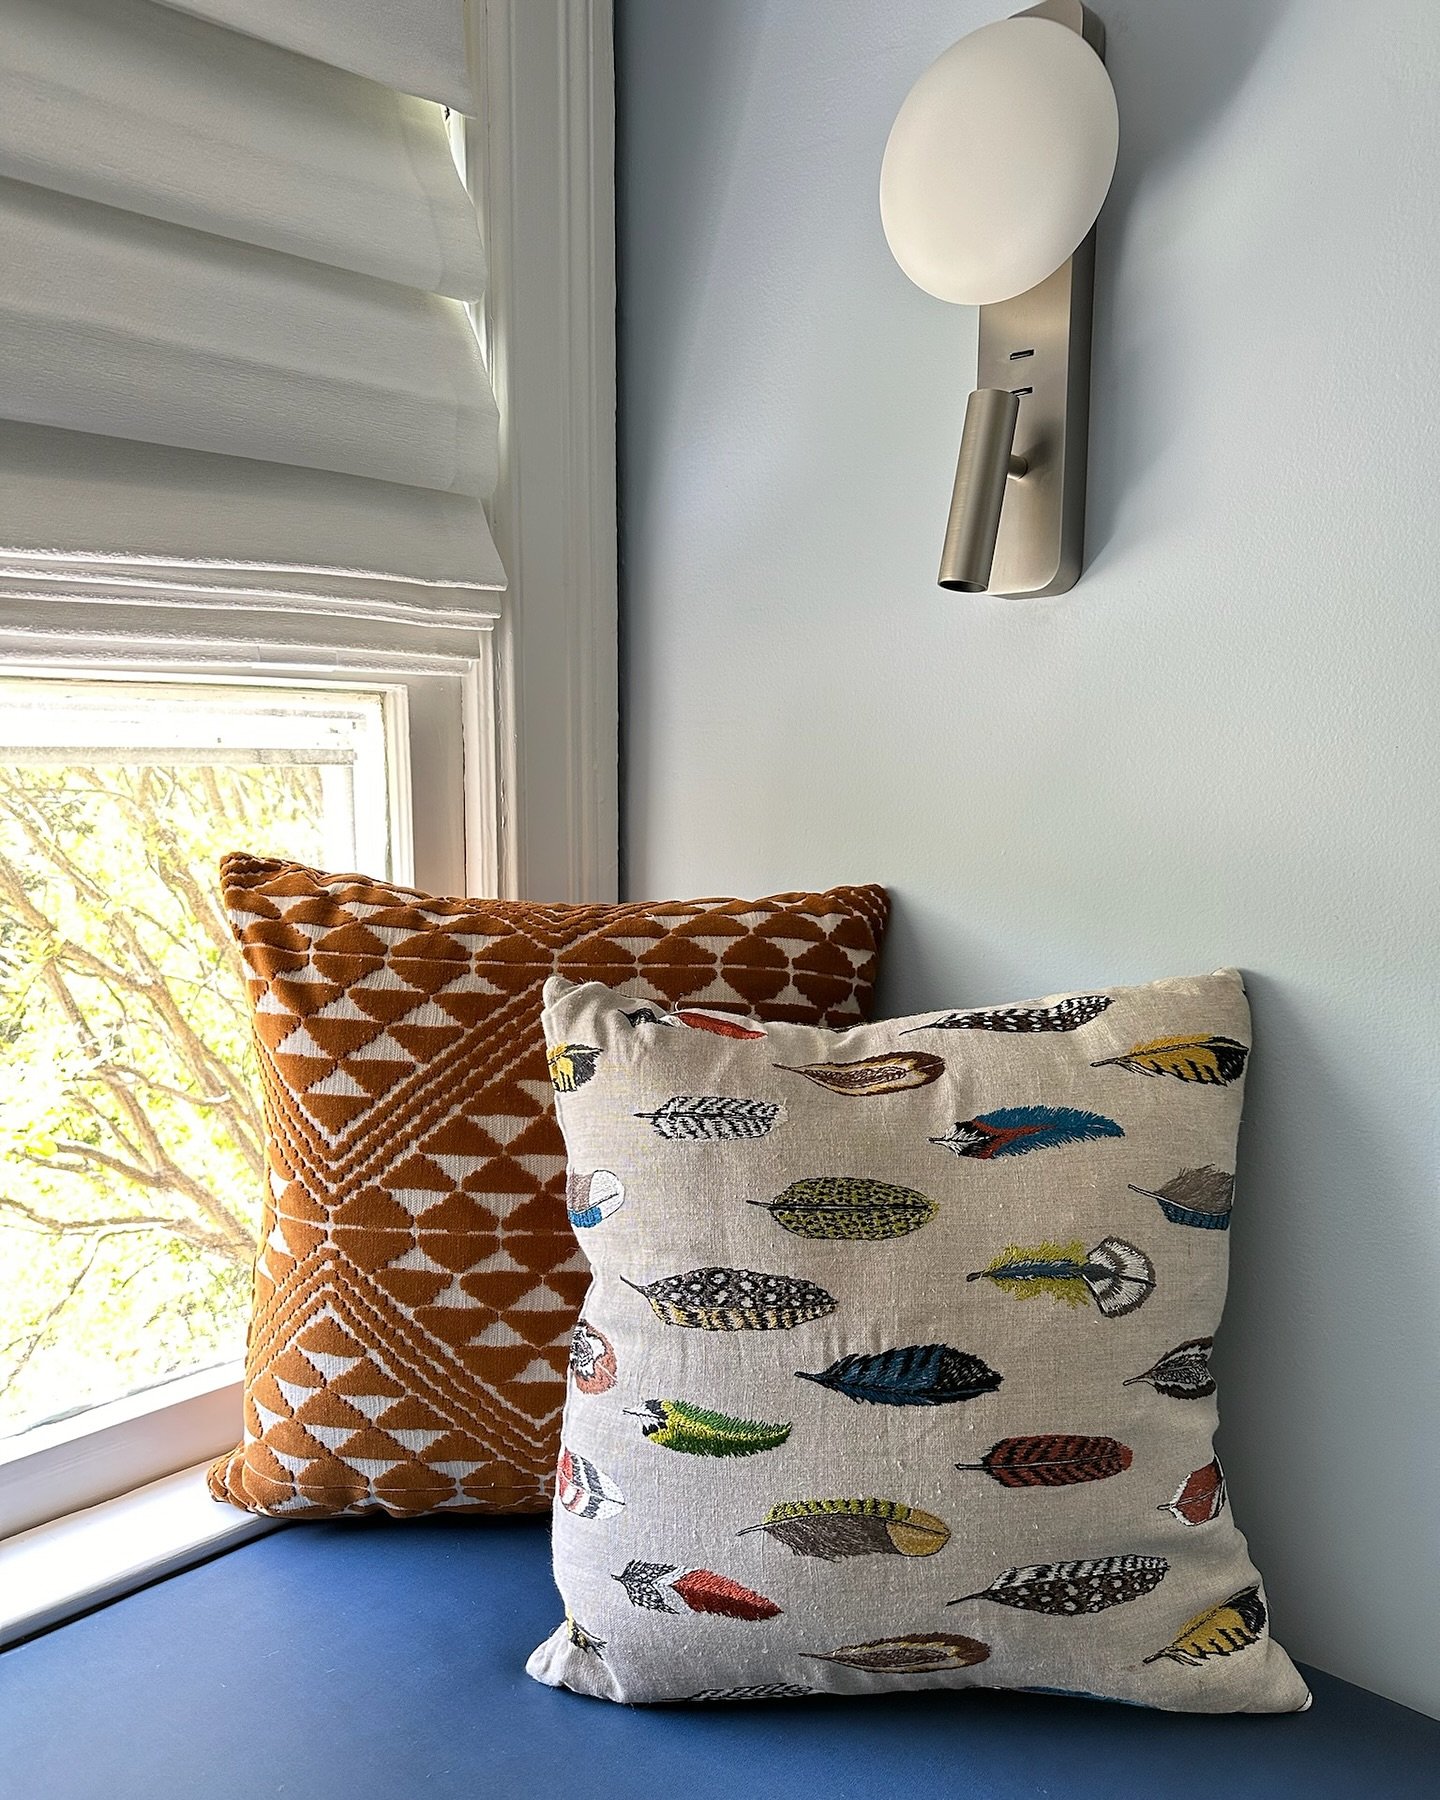 A perfect reading nook for the weekend! Wall sconce reading light from @astrolighting and pillows make by @pillow.punk with @pollack fabrics.

#interiordesign #tobedesigned #tobedesigngroup